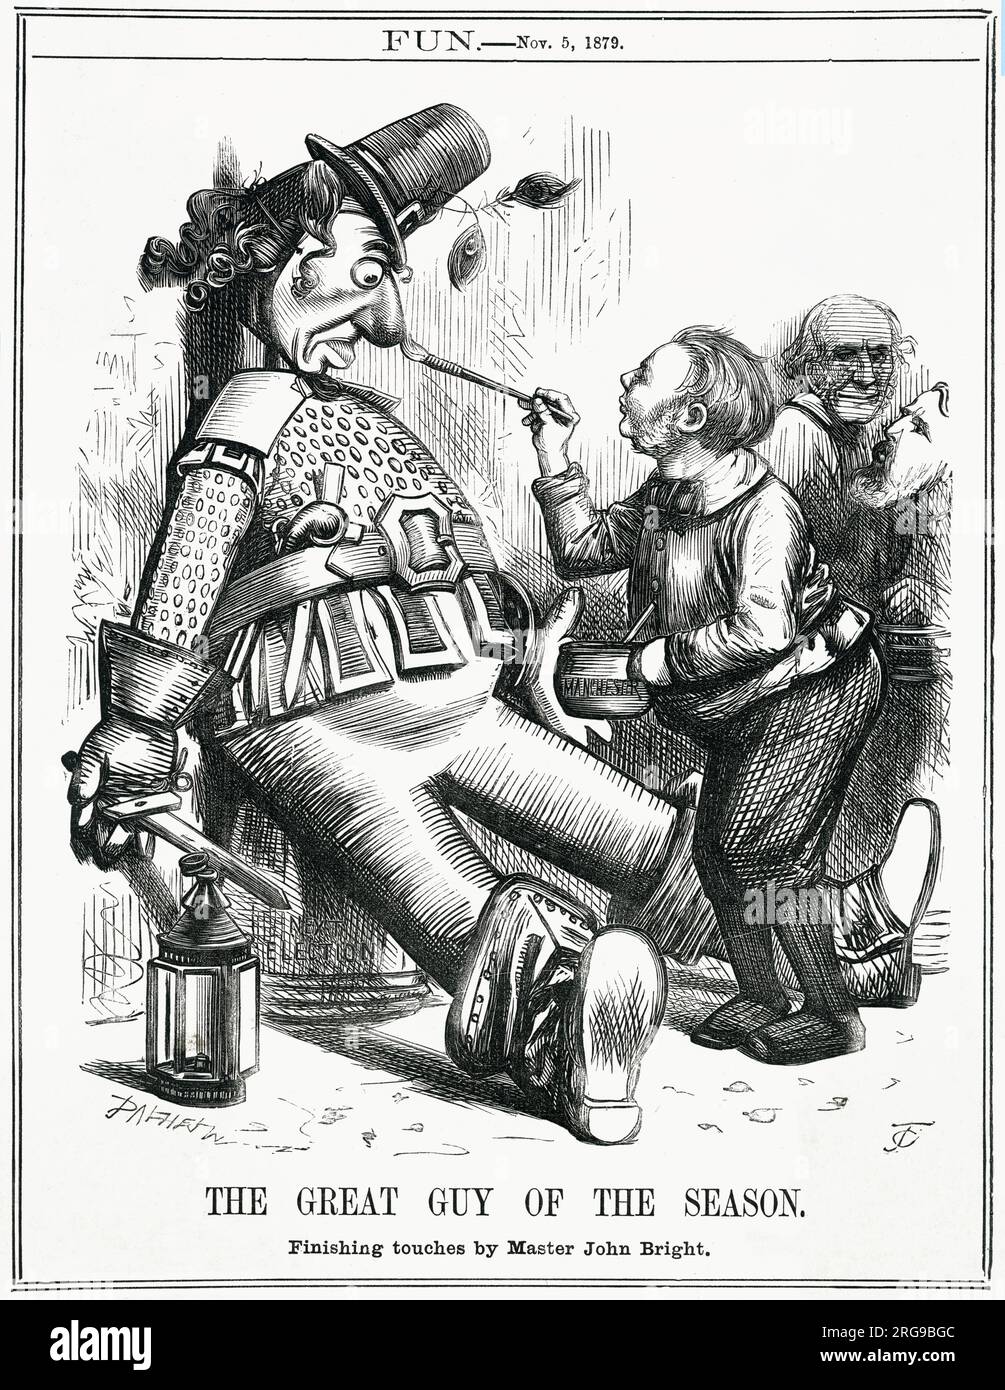 Cartoon, The Great Guy of the Season -- a satirical comment on the Liberal Party threat to the Conservative Prime Minister, Benjamin Disraeli. Disraeli is depicted as the Bonfire Night 'Guy', being painted by Liberal MP John Bright, with his colleagues Gladstone and Hartington watching from the background. Stock Photo